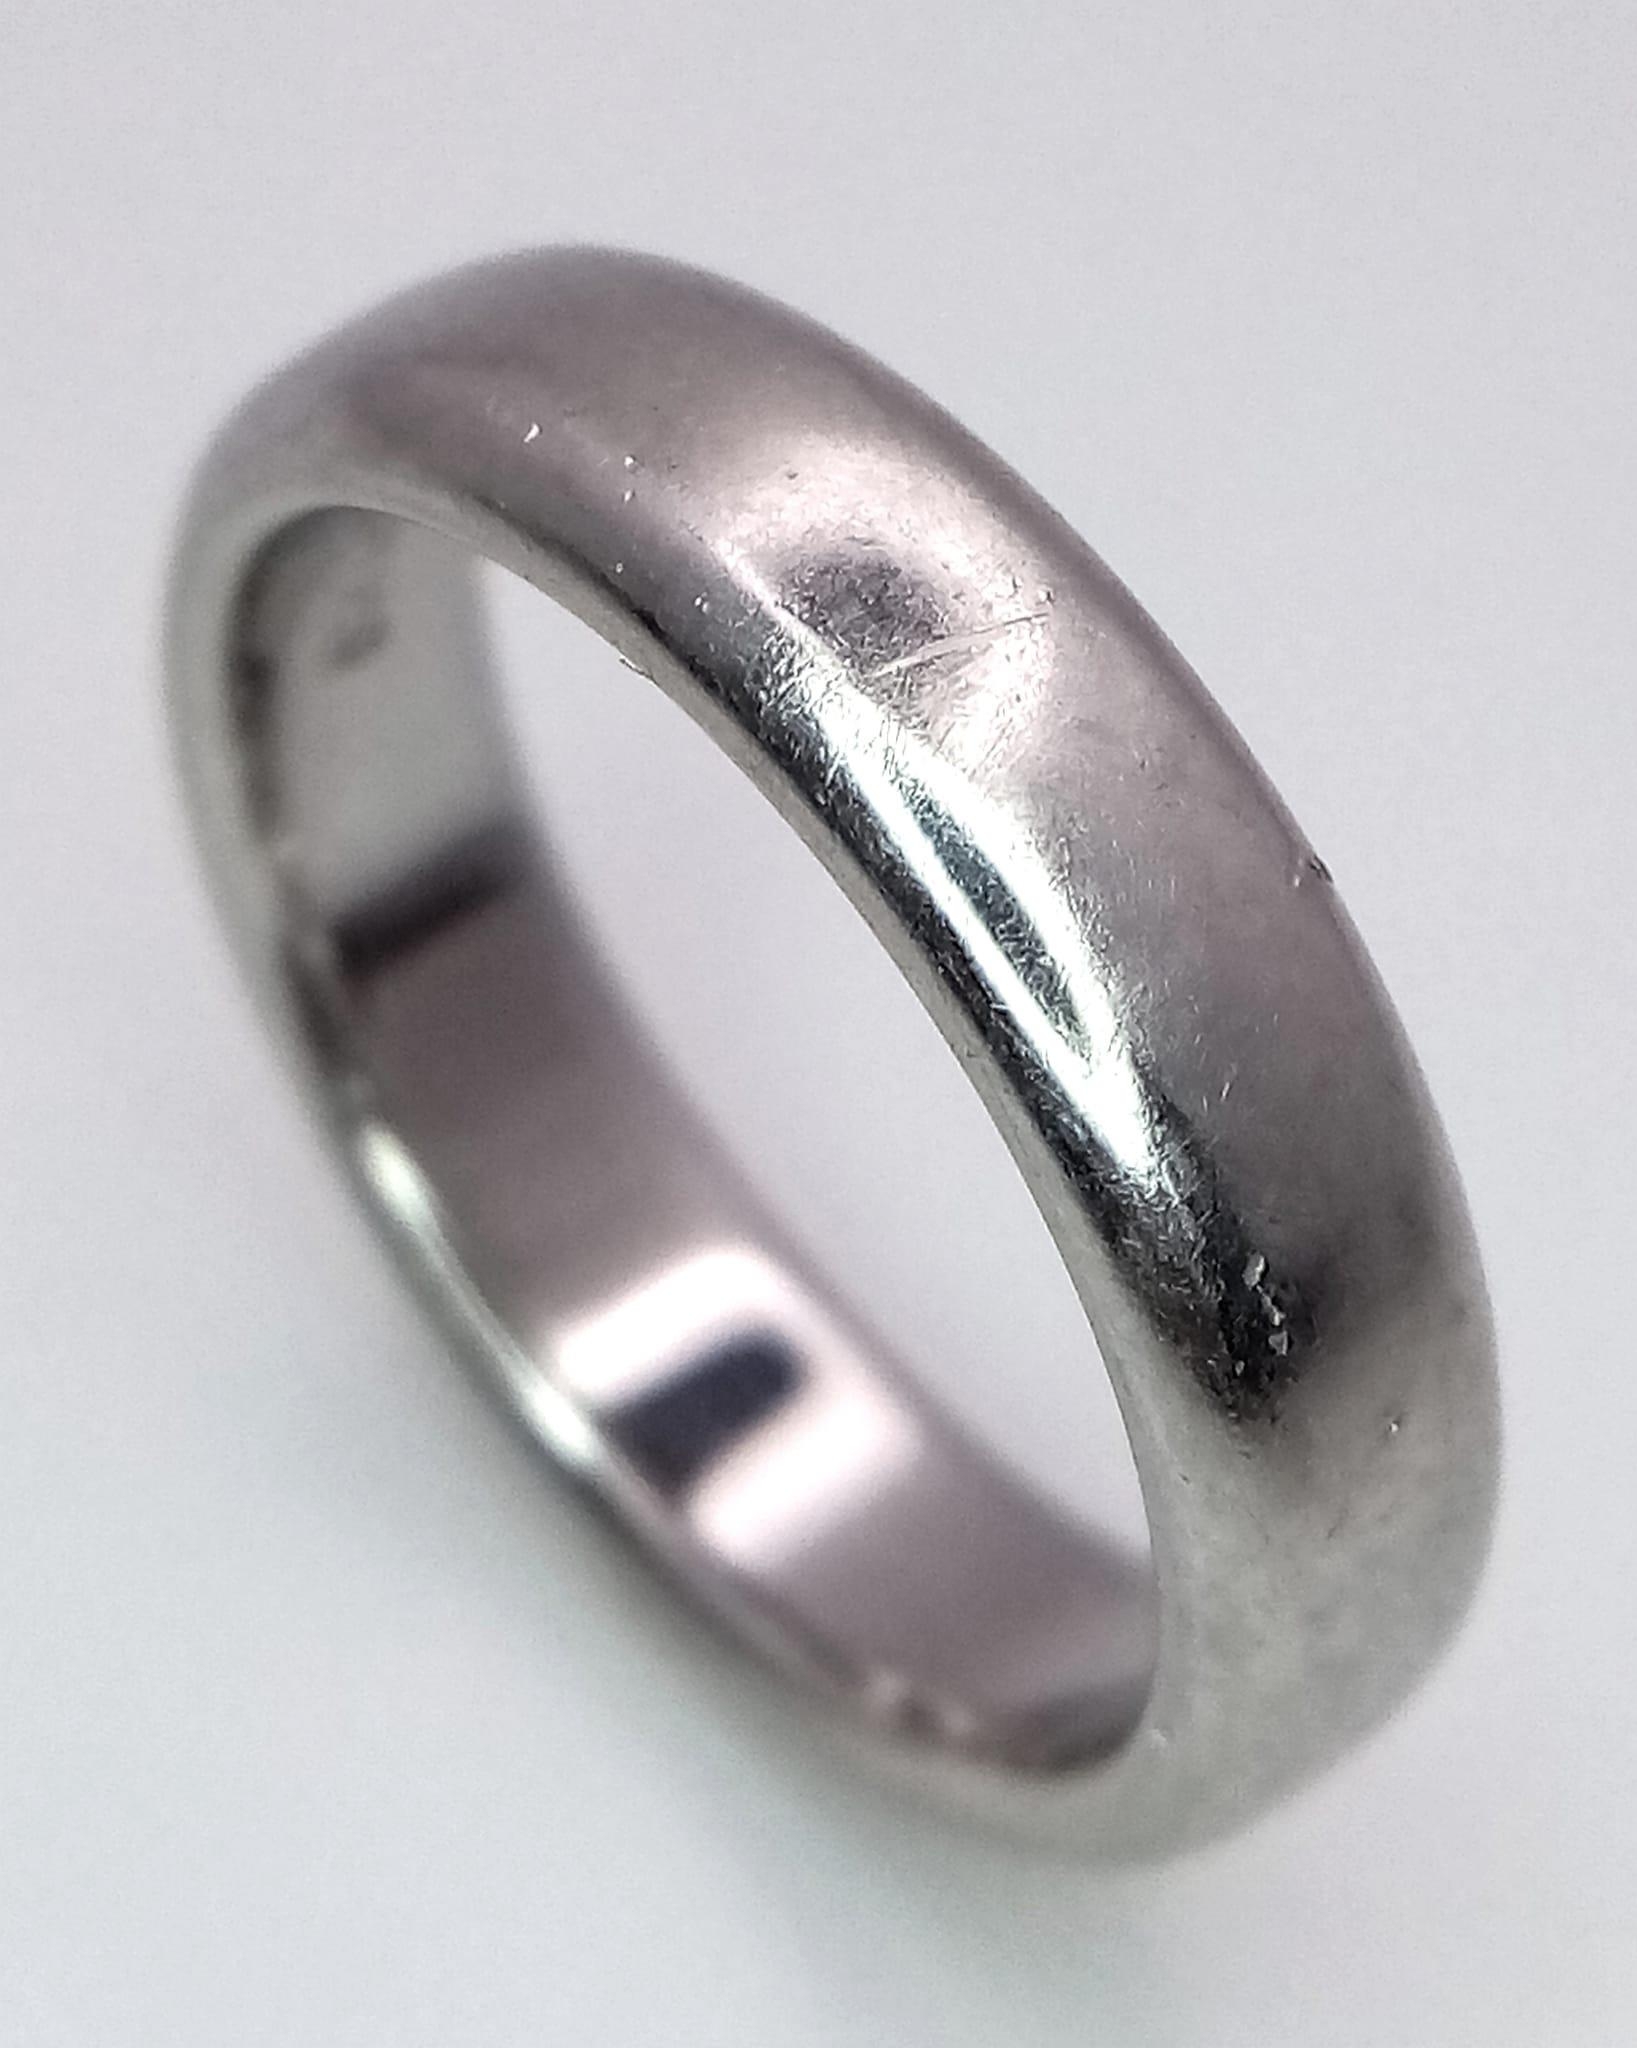 Tiffany and Co Platinum 4mm rounded band ring. 8.2g. Size K.